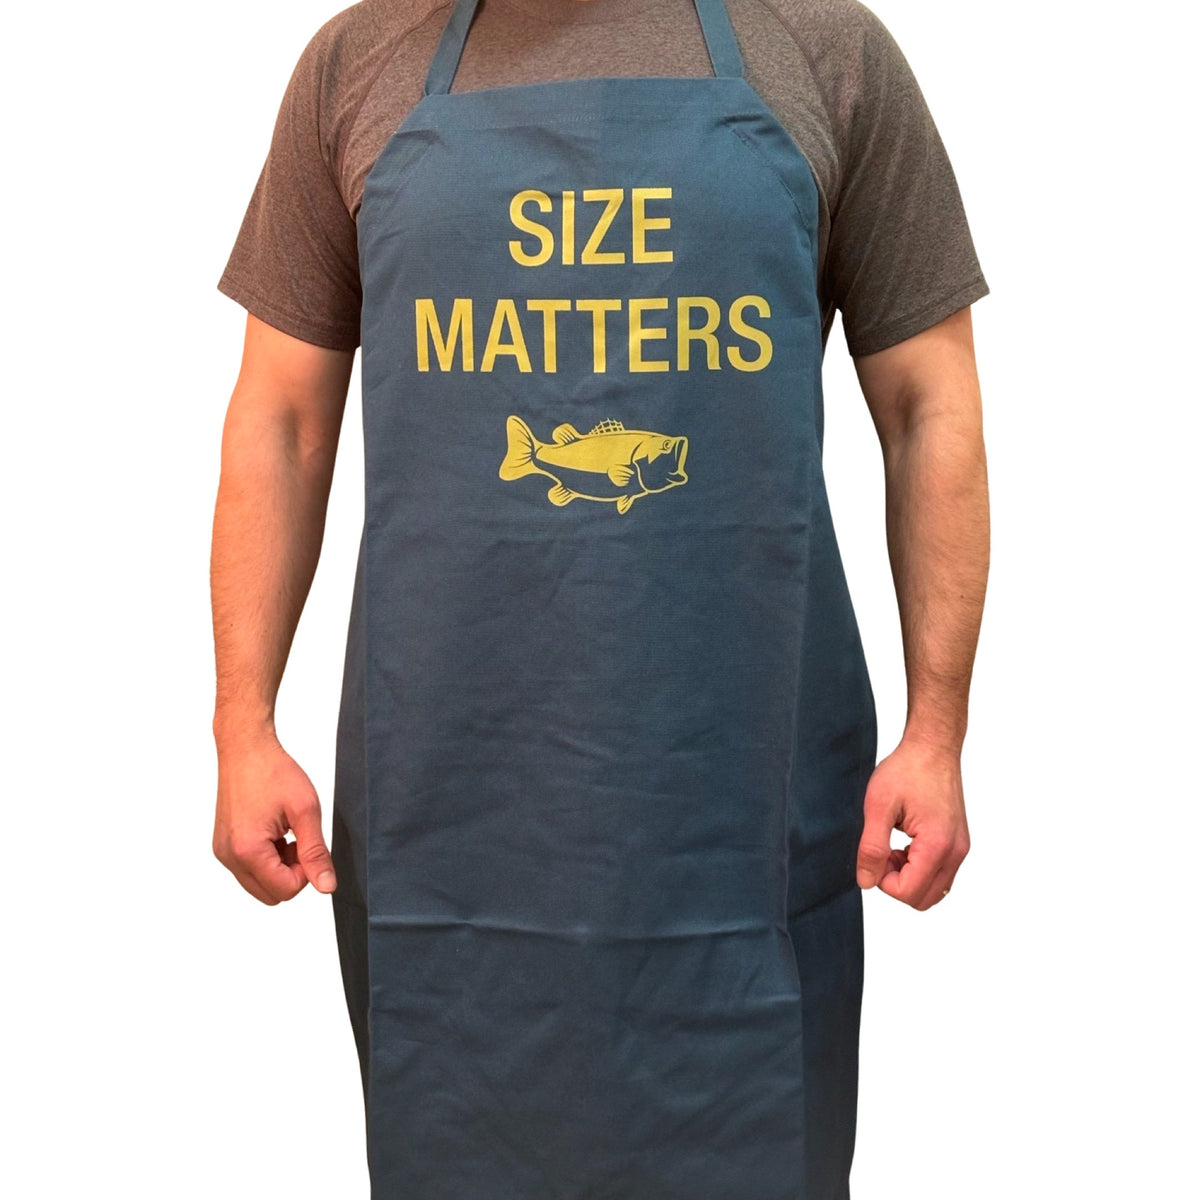 "Size Matters" 100% Cotton Long Apron - For The Ones Who Like To Fish